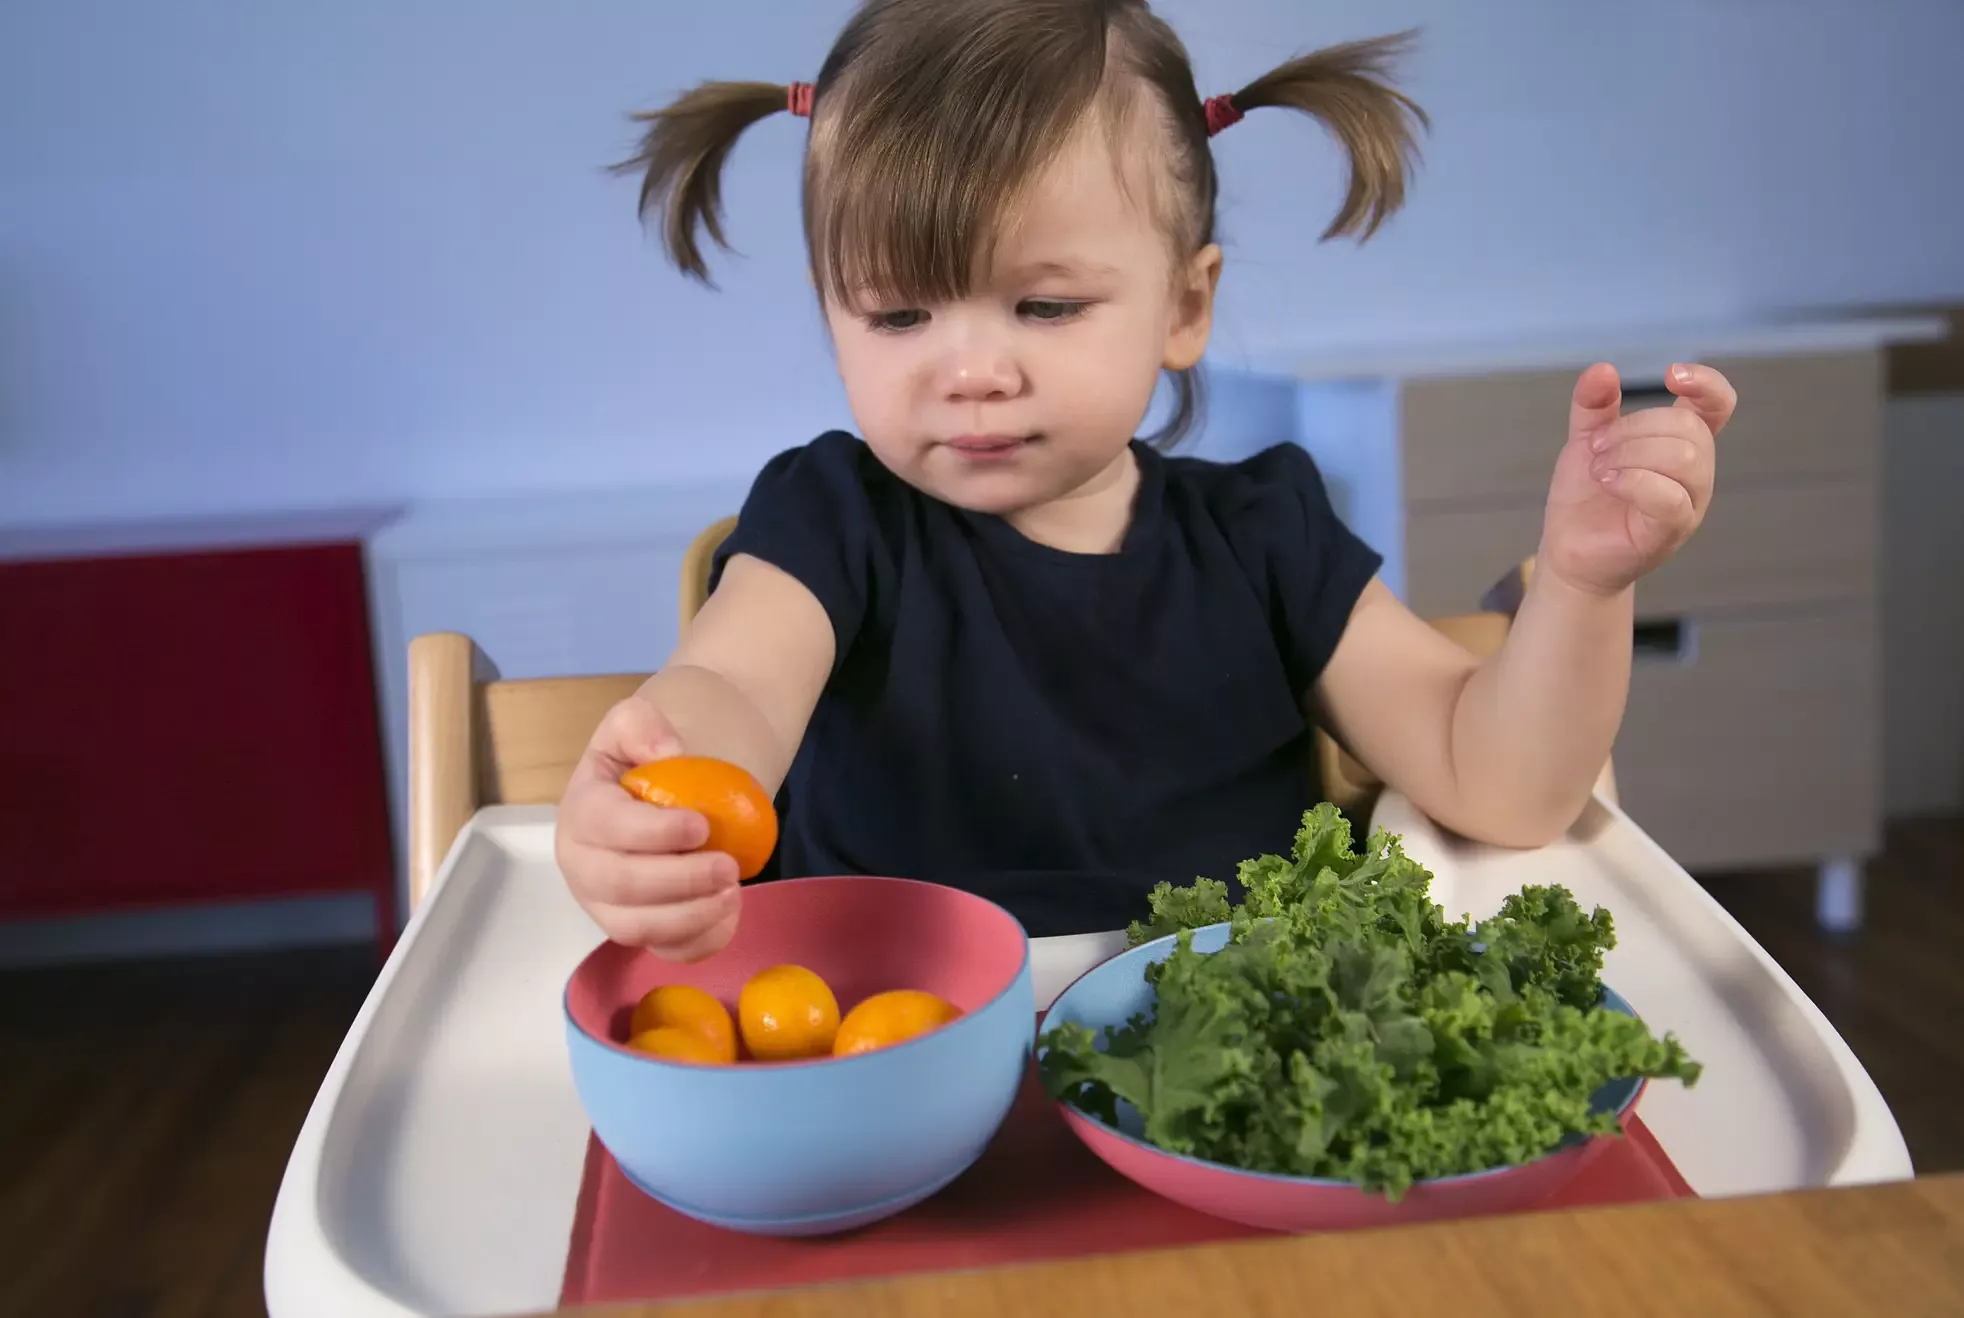 A baby playing with a tangerine above the Bumble magnetic flatware set.